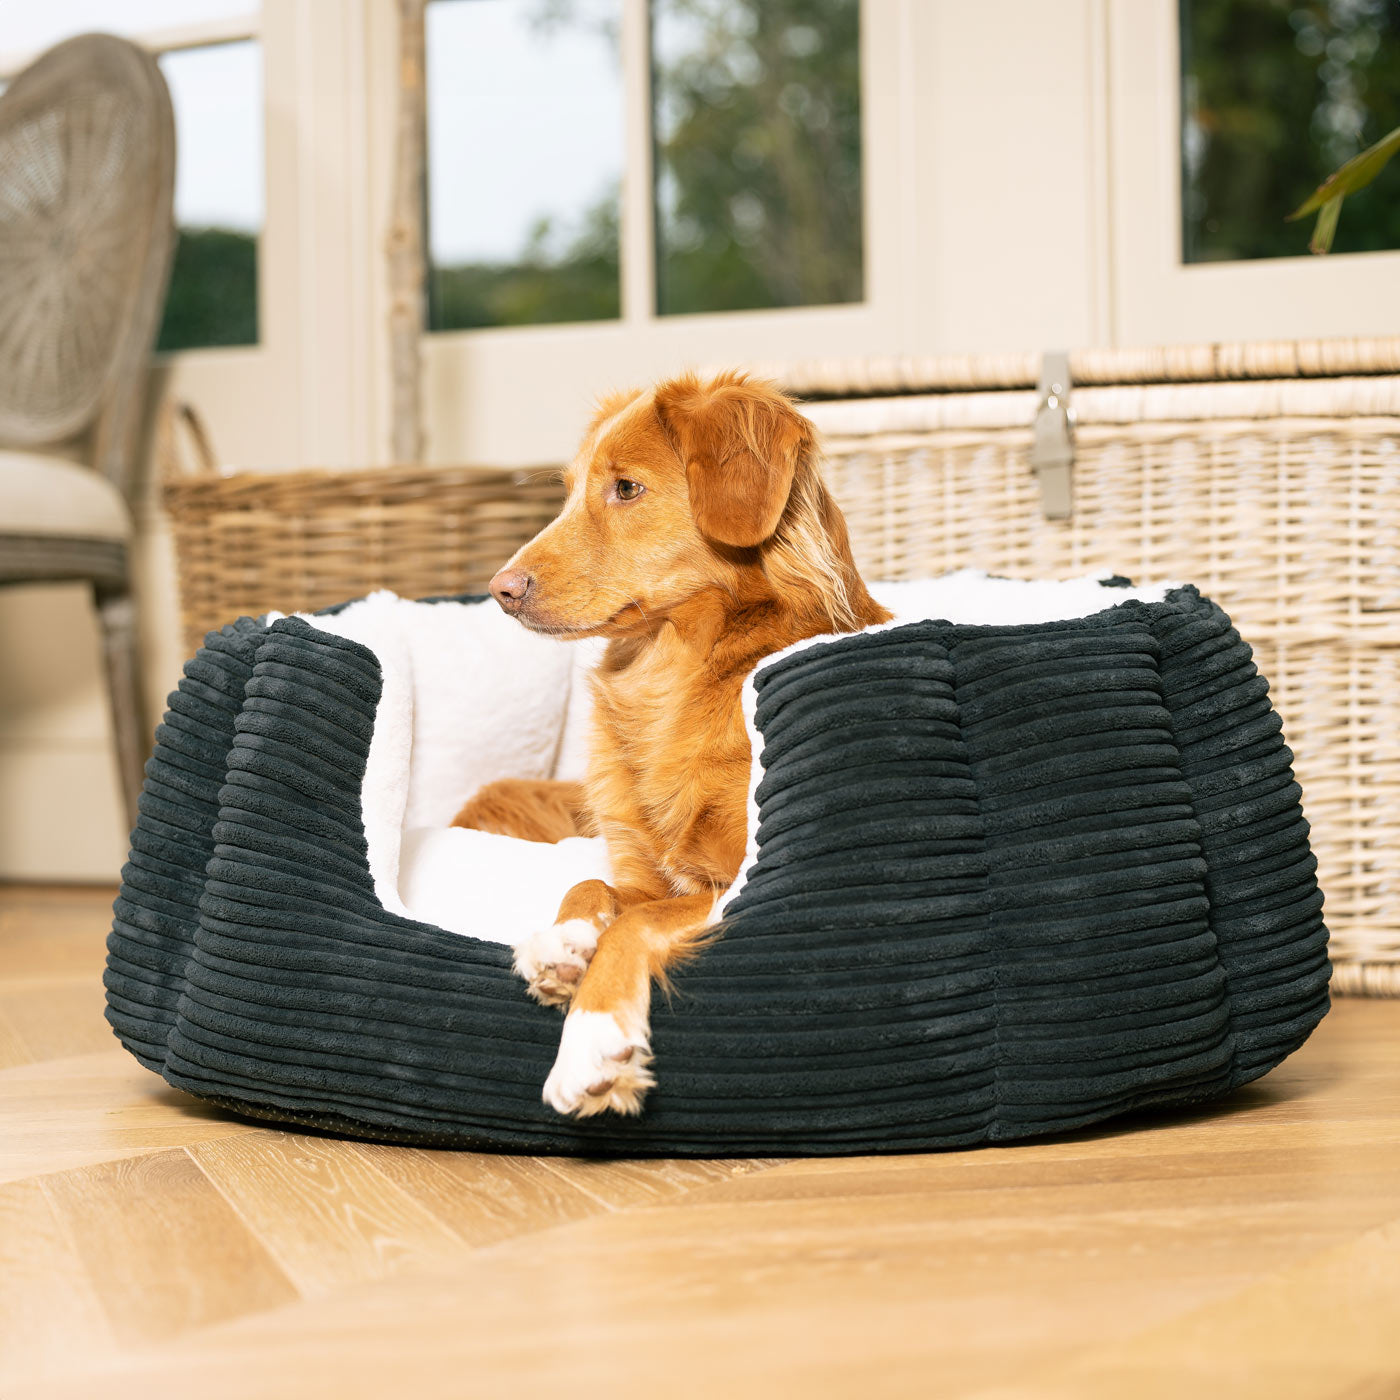 Discover Our Luxurious High Wall Bed For Dogs, Featuring inner pillow with plush teddy fleece on one side To Craft The Perfect Dog Bed In Stunning Essentials Navy Plush! Available To Personalize Now at Lords & Labradors US